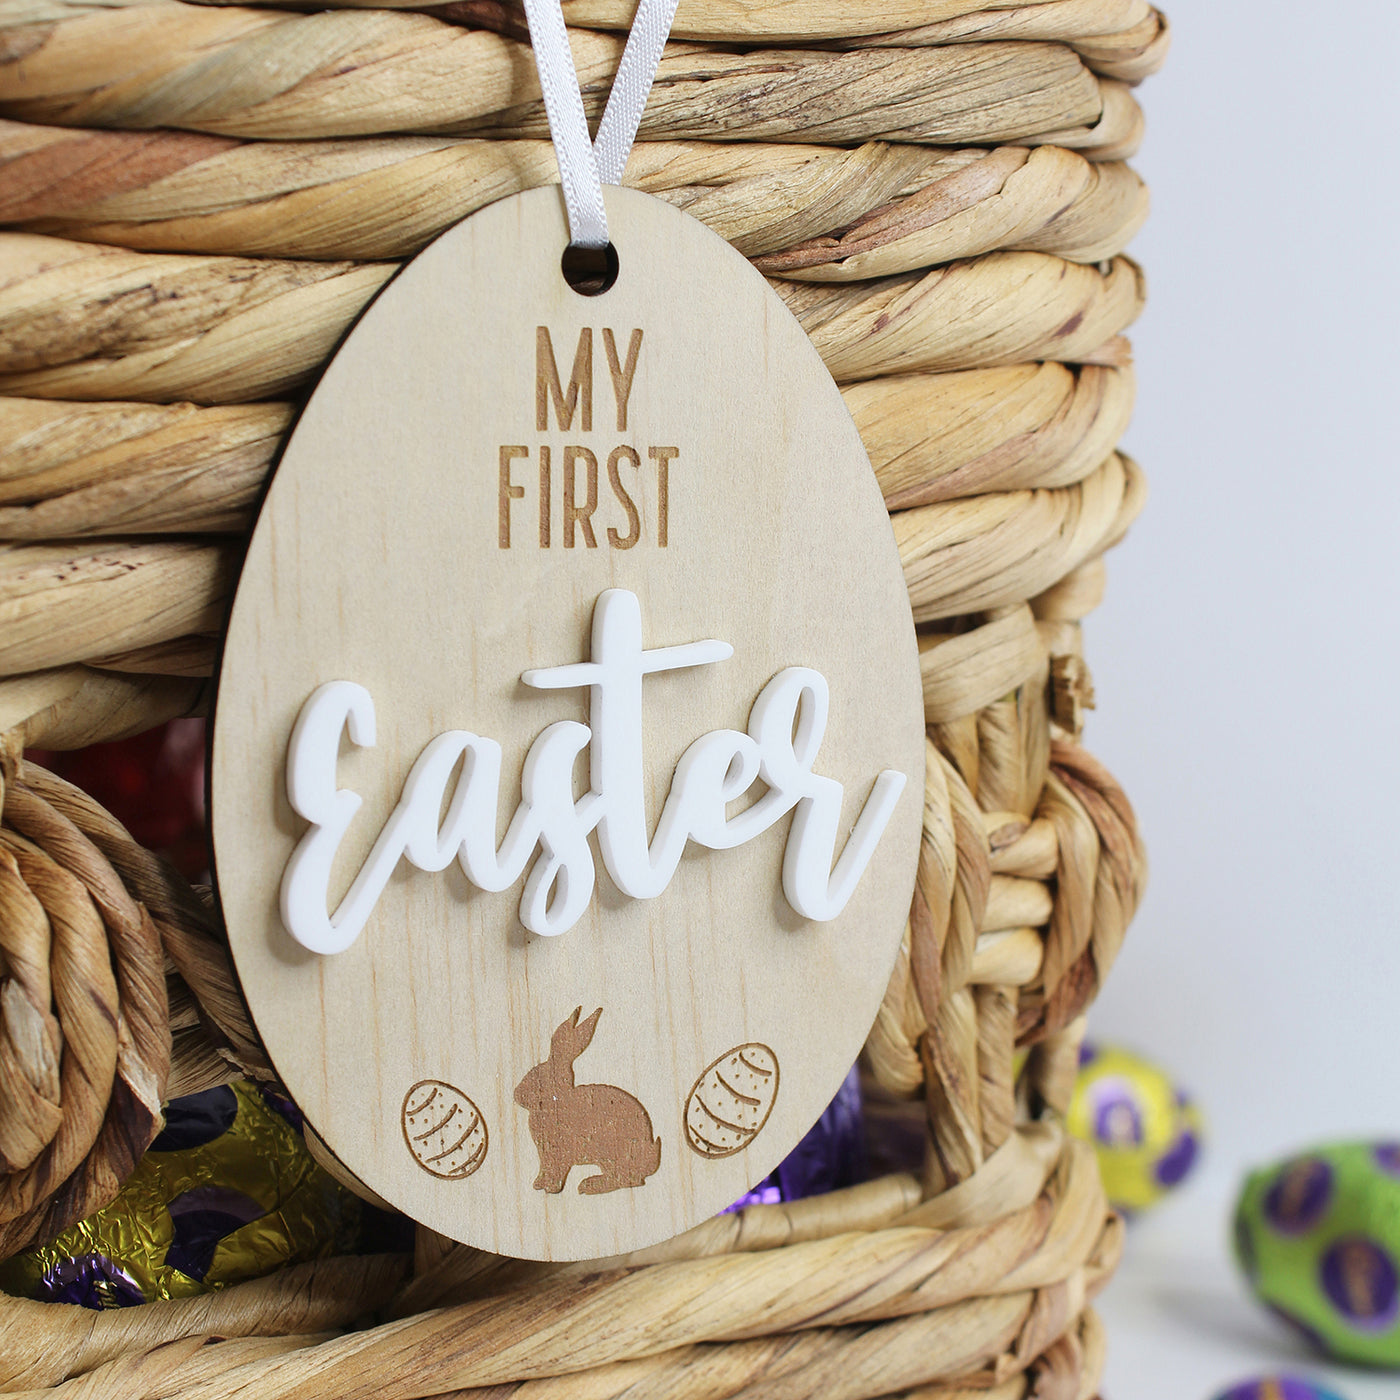 My First Easter Tag